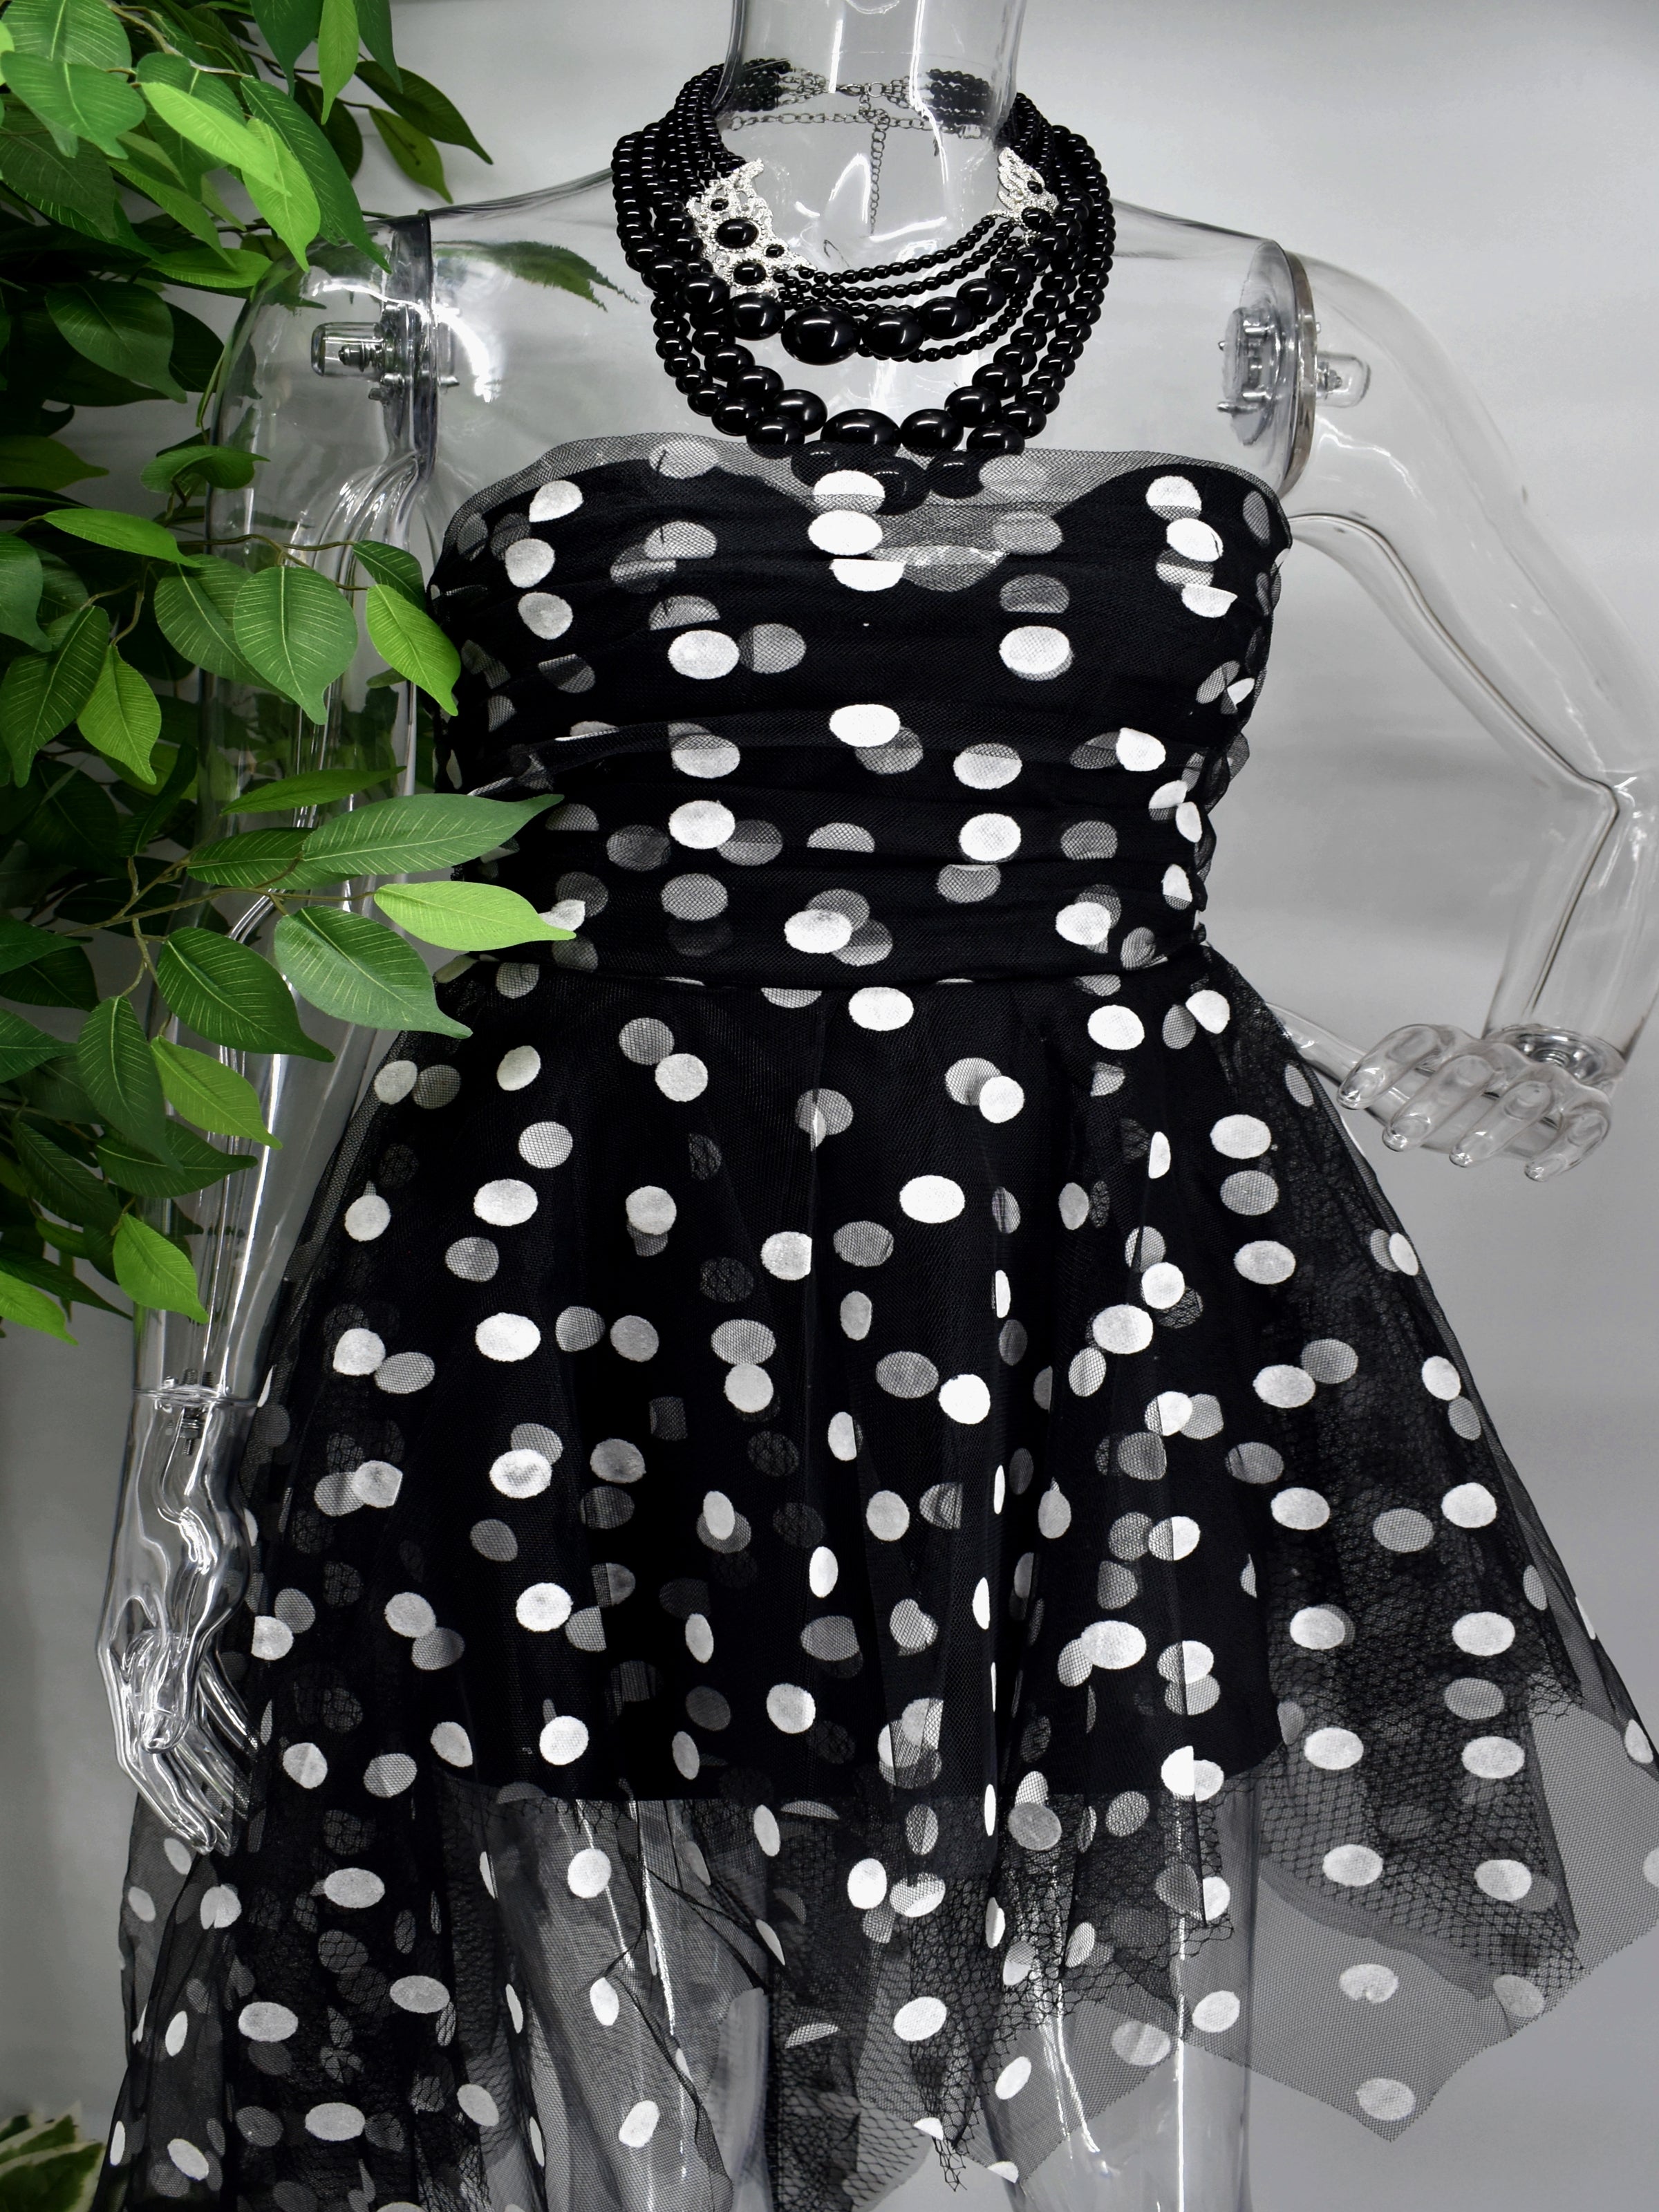 Be Bold and beautiful in our Blessings Polka dot dress.  Enjoy our blessings and its sweetheart neckline, fitted bodice and flirty flair skirt with an uneven hem. 